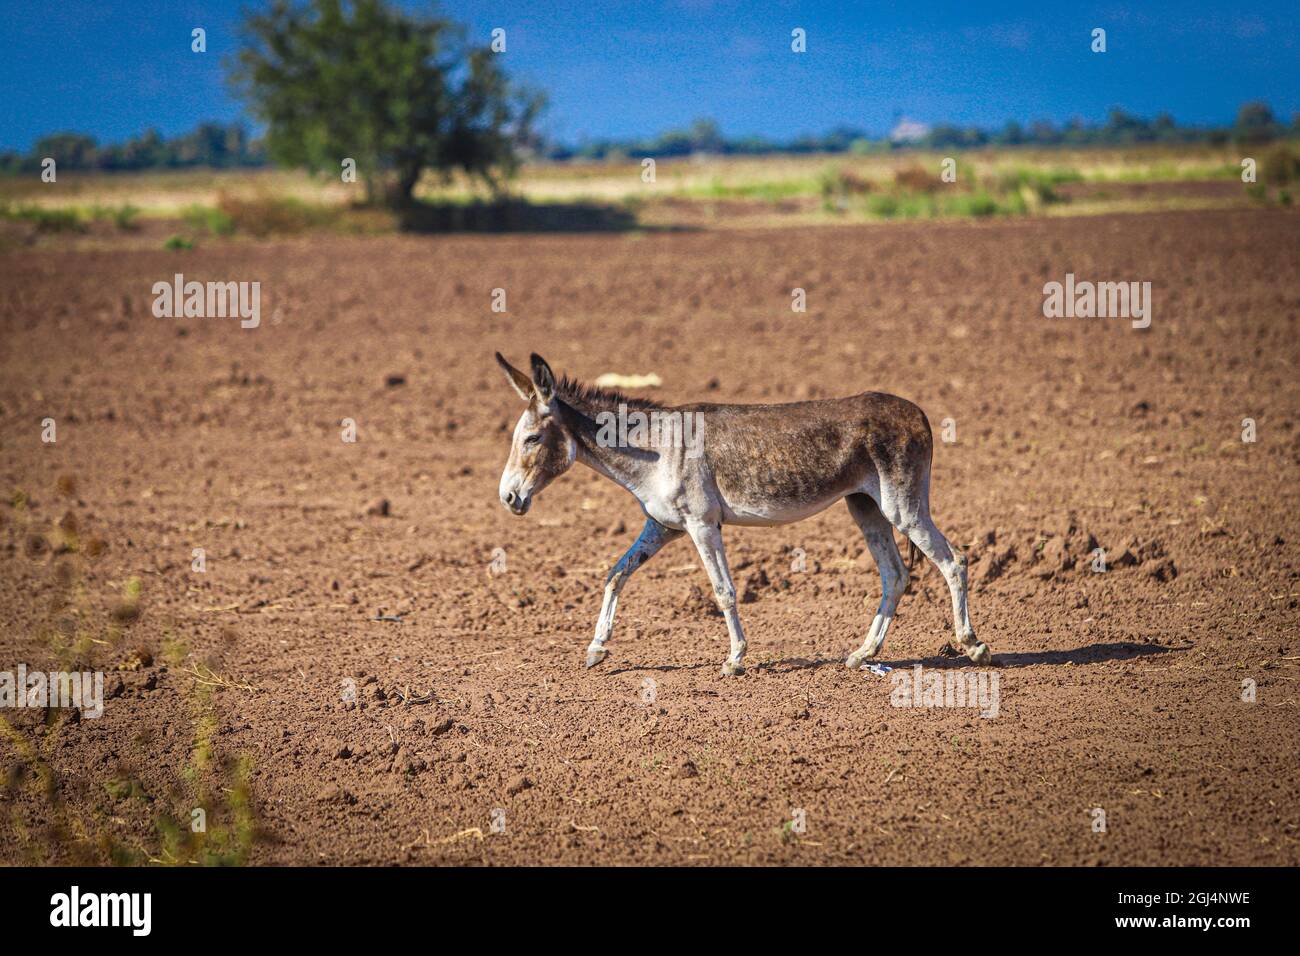 A donkey among the land field landscape for agriculture in Navovaxia, Huatabampo, Mexico. Community or town in the Mexican state of Sonora .... Photo by Luis Gutierrez / NortePhoto.com)   Un burro entre el paisaje de campo de tierra para la agricultura en Navovaxia, Huatabampo, Mexico. Comunidad o pueblo en el estado mexicano de Sonora.... Photo by Luis Gutierrez / NortePhoto.com) Stock Photo